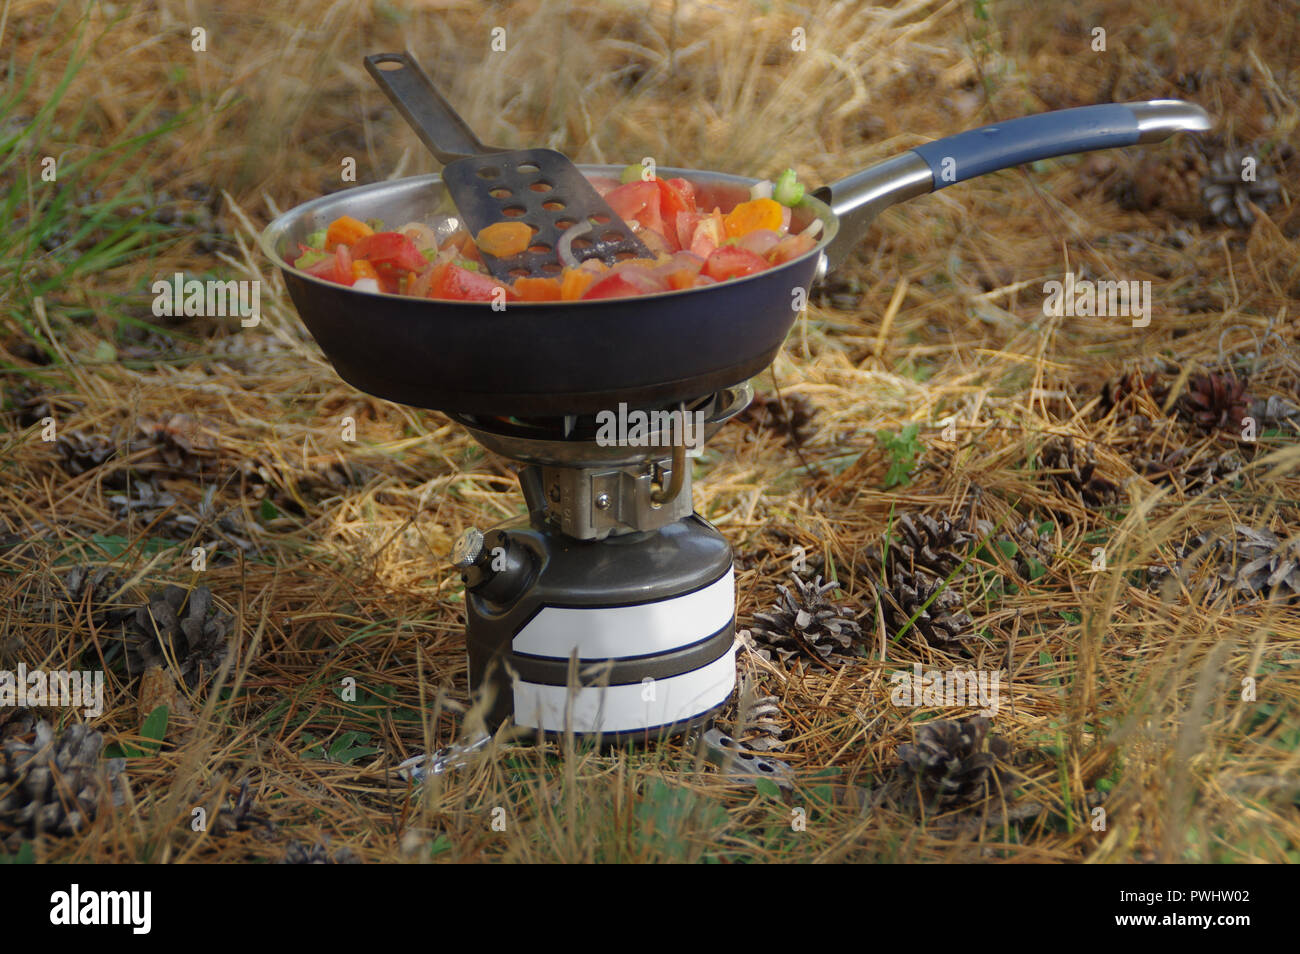 A small portable gas stove for cooking Stock Photo - Alamy